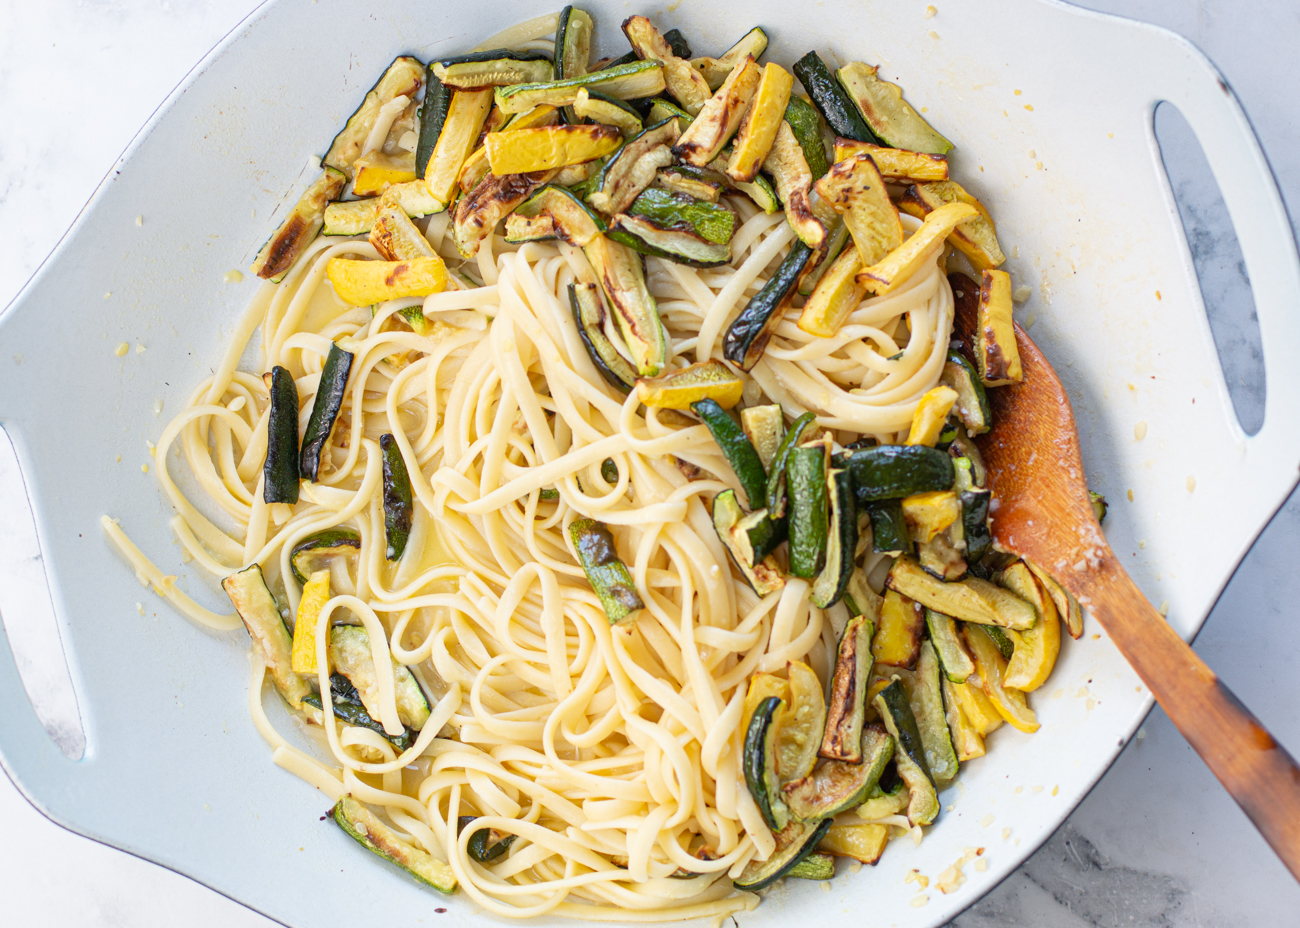 Add half of the zucchini, pasta water, butter, half of parmesan cheese and stir to create a creamy sauce 